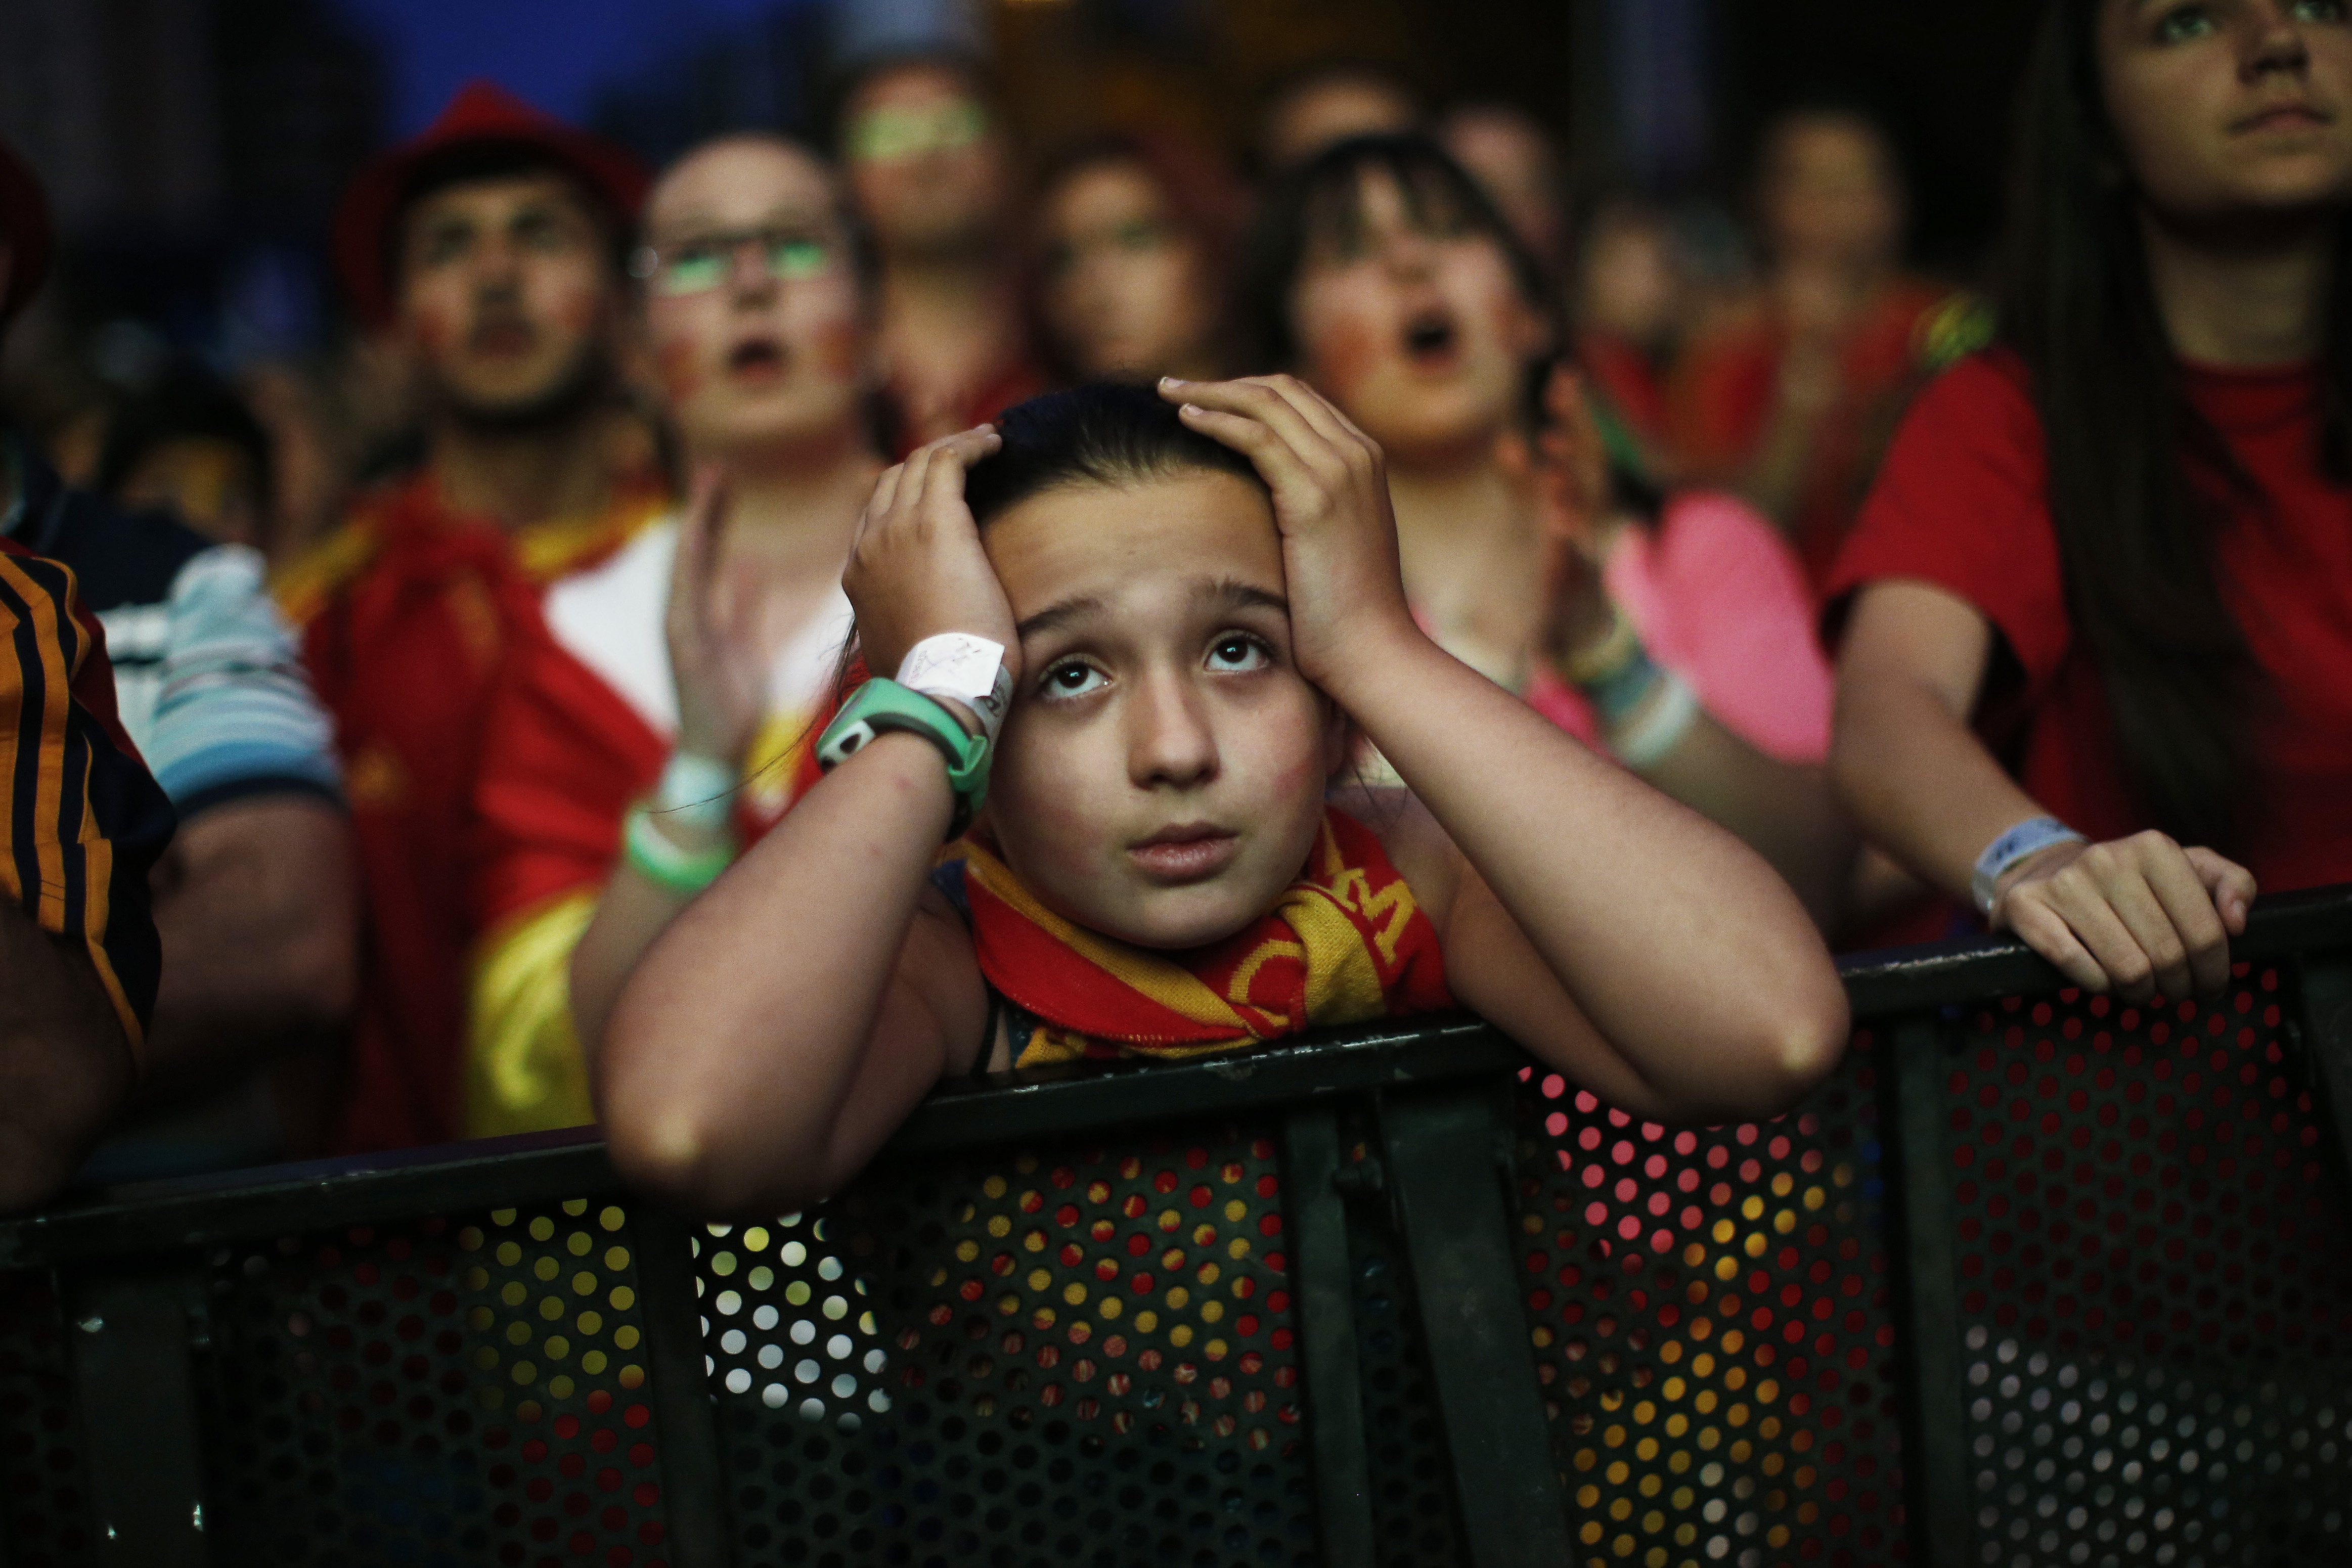 A Spanish soccer fan holds her head as she watches, on a giant display, the World Cup soccer match between Spain and Chile, in Madrid, Spain, Wednesday, June 18, 2014. (AP Photo/Andres Kudacki)